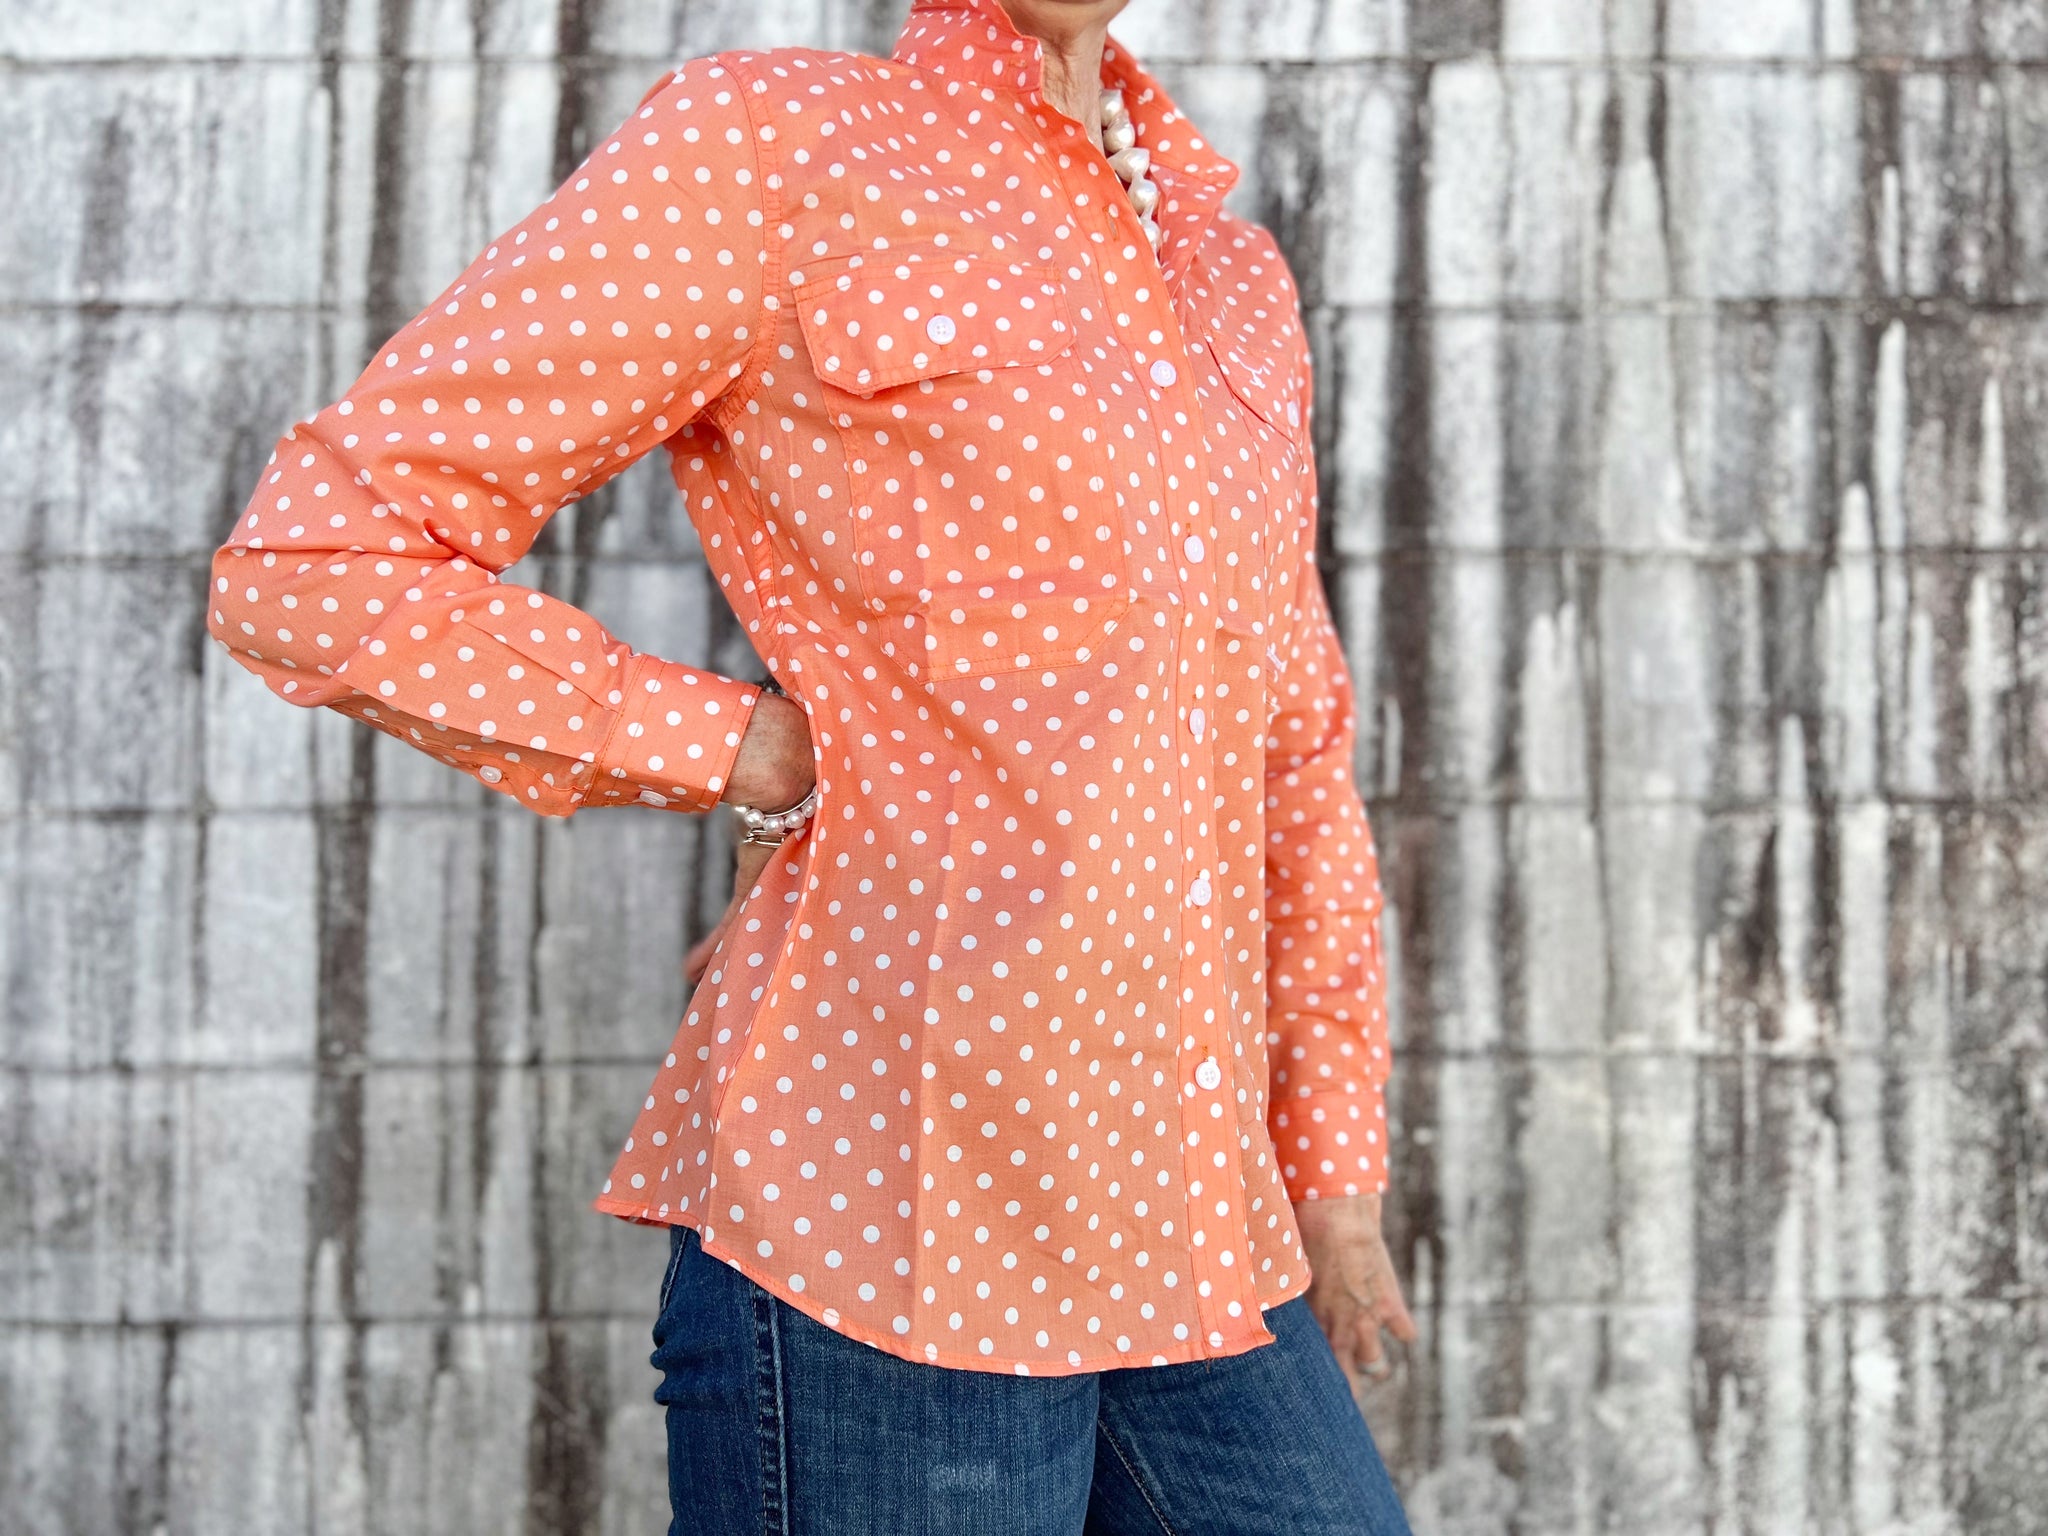 WWLS2245 Just Country Ladies Abbey Full Button Print Workshirt Coral Polka Dots